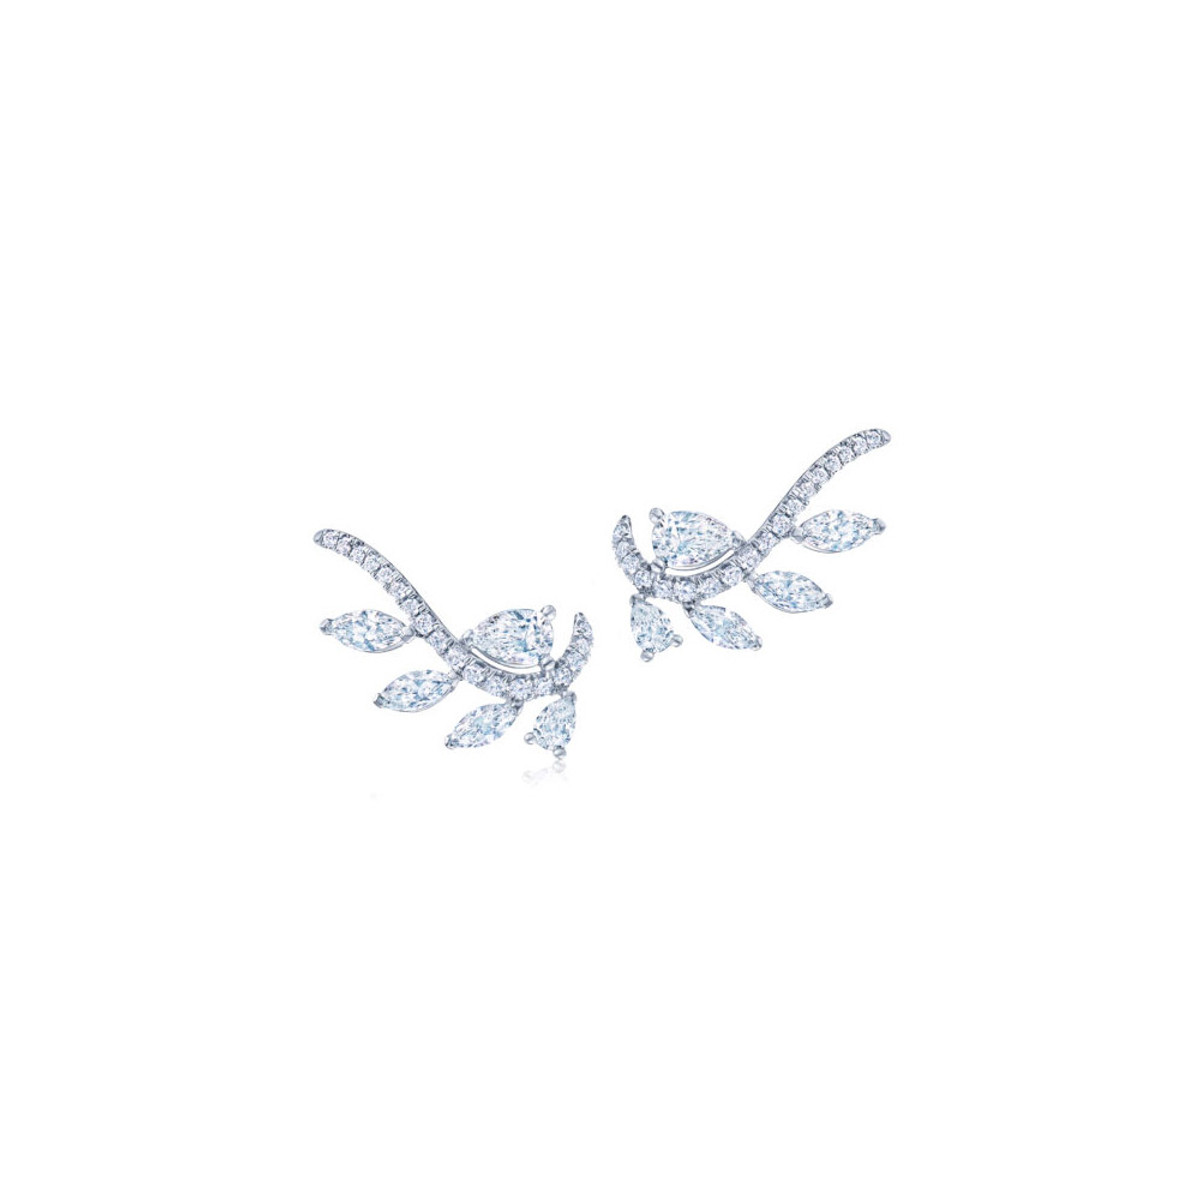 Kwiat 18K White Gold Vine Collection Diamond Earrings-51867 Product Image